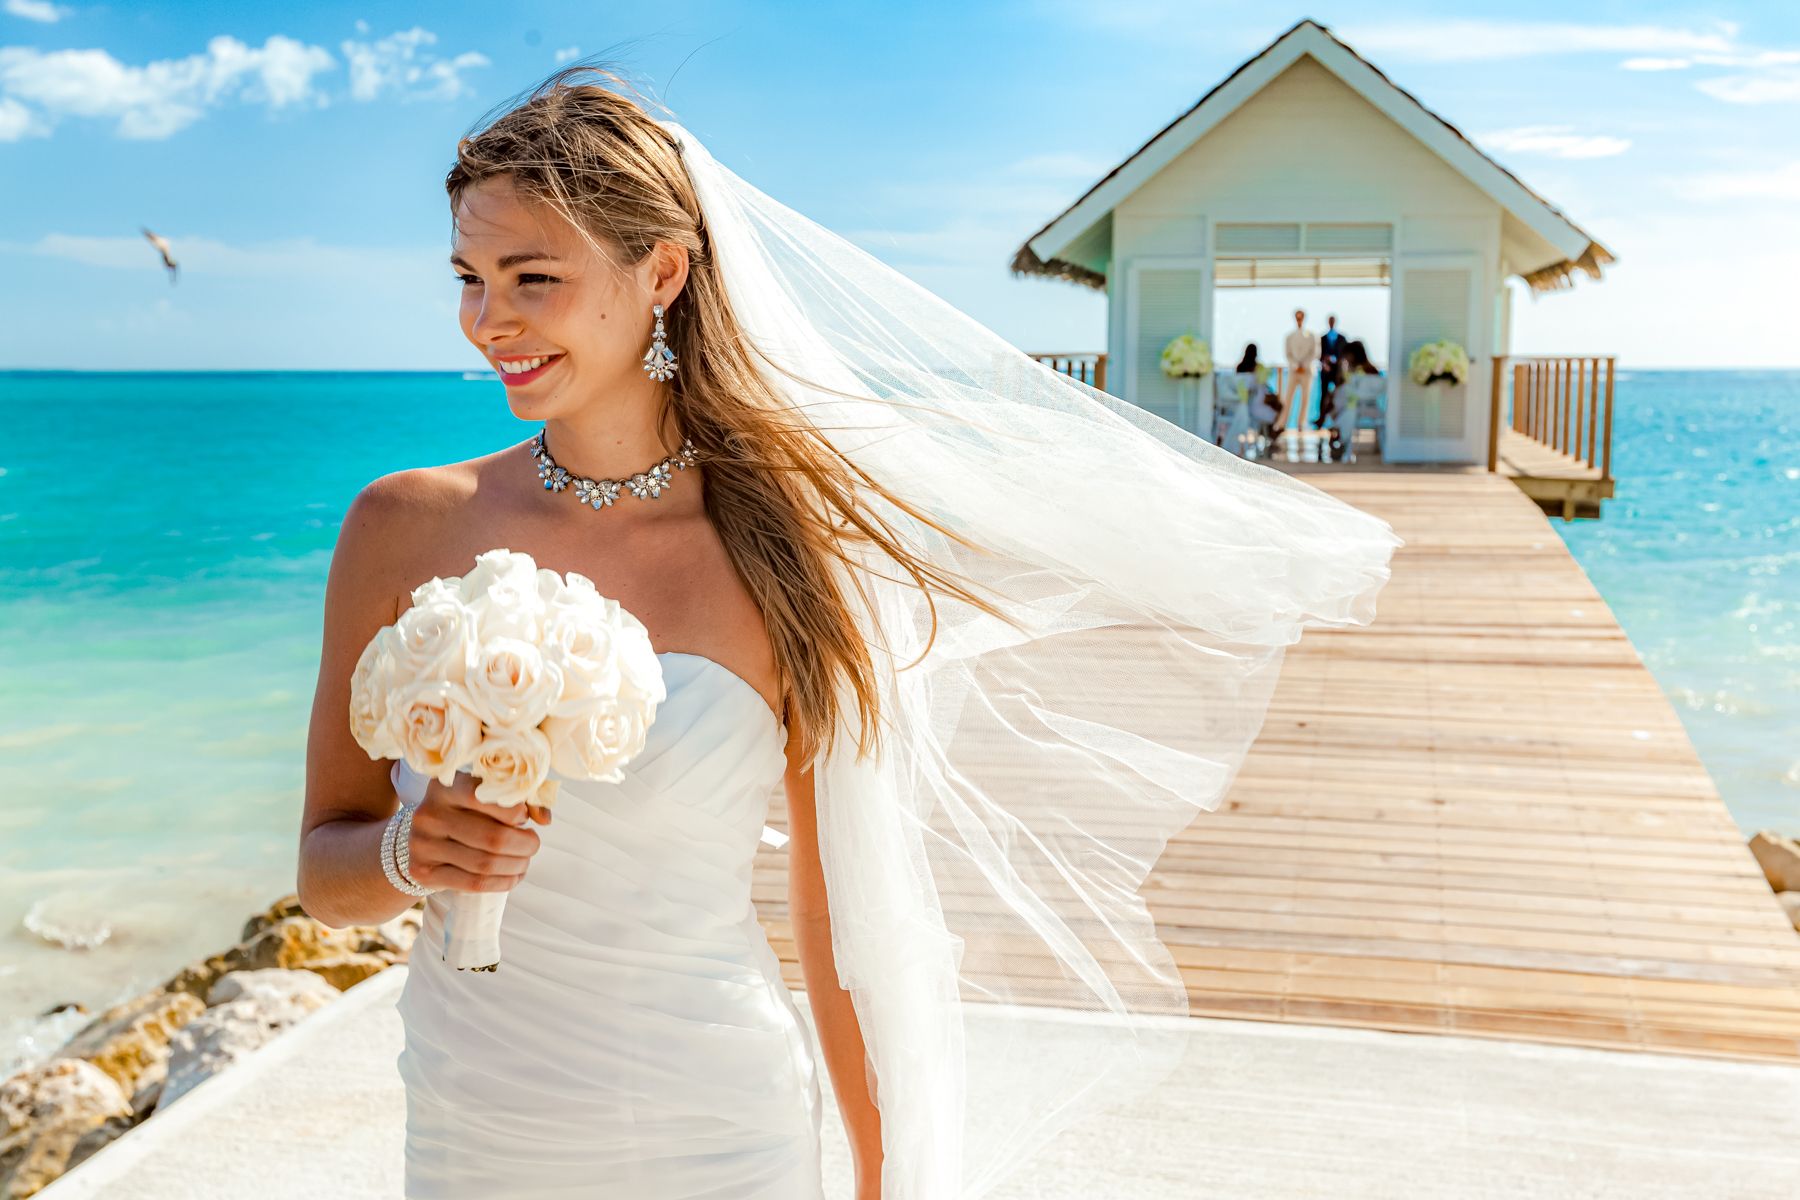 24 Best Caribbean Wedding Venues That You Can't Go Wrong With